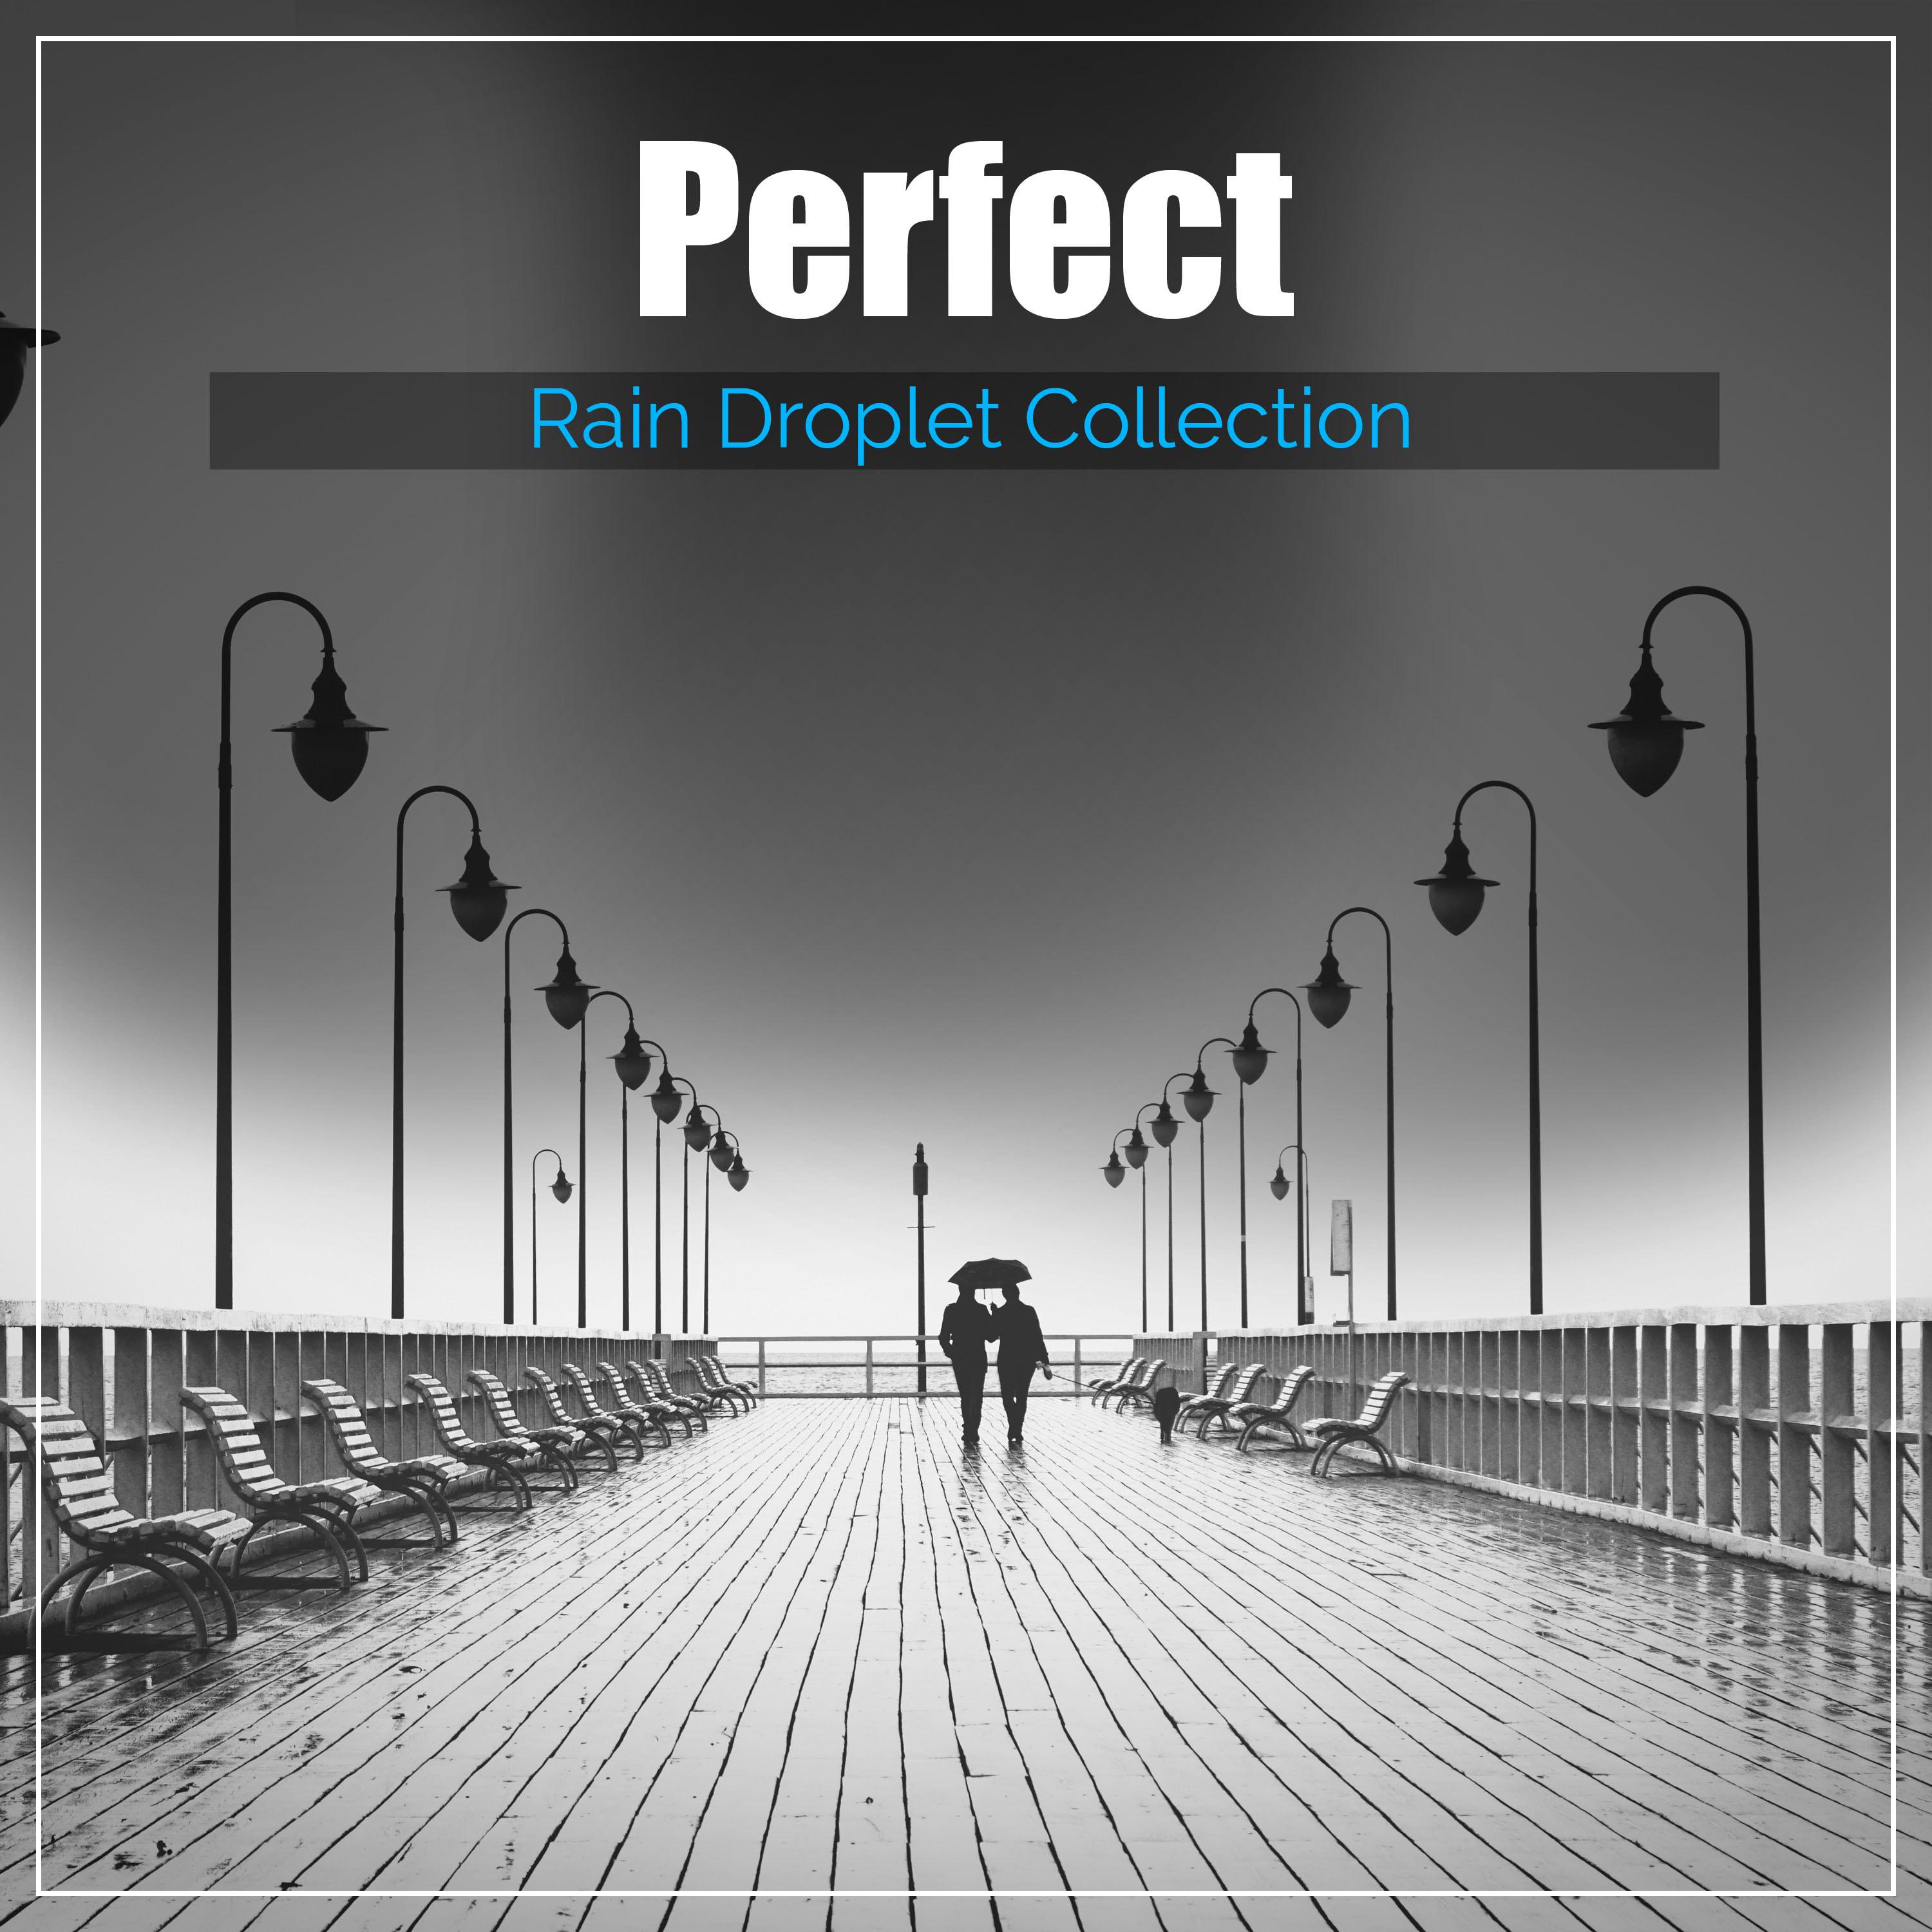 #21 Perfect Rain Droplet Collection